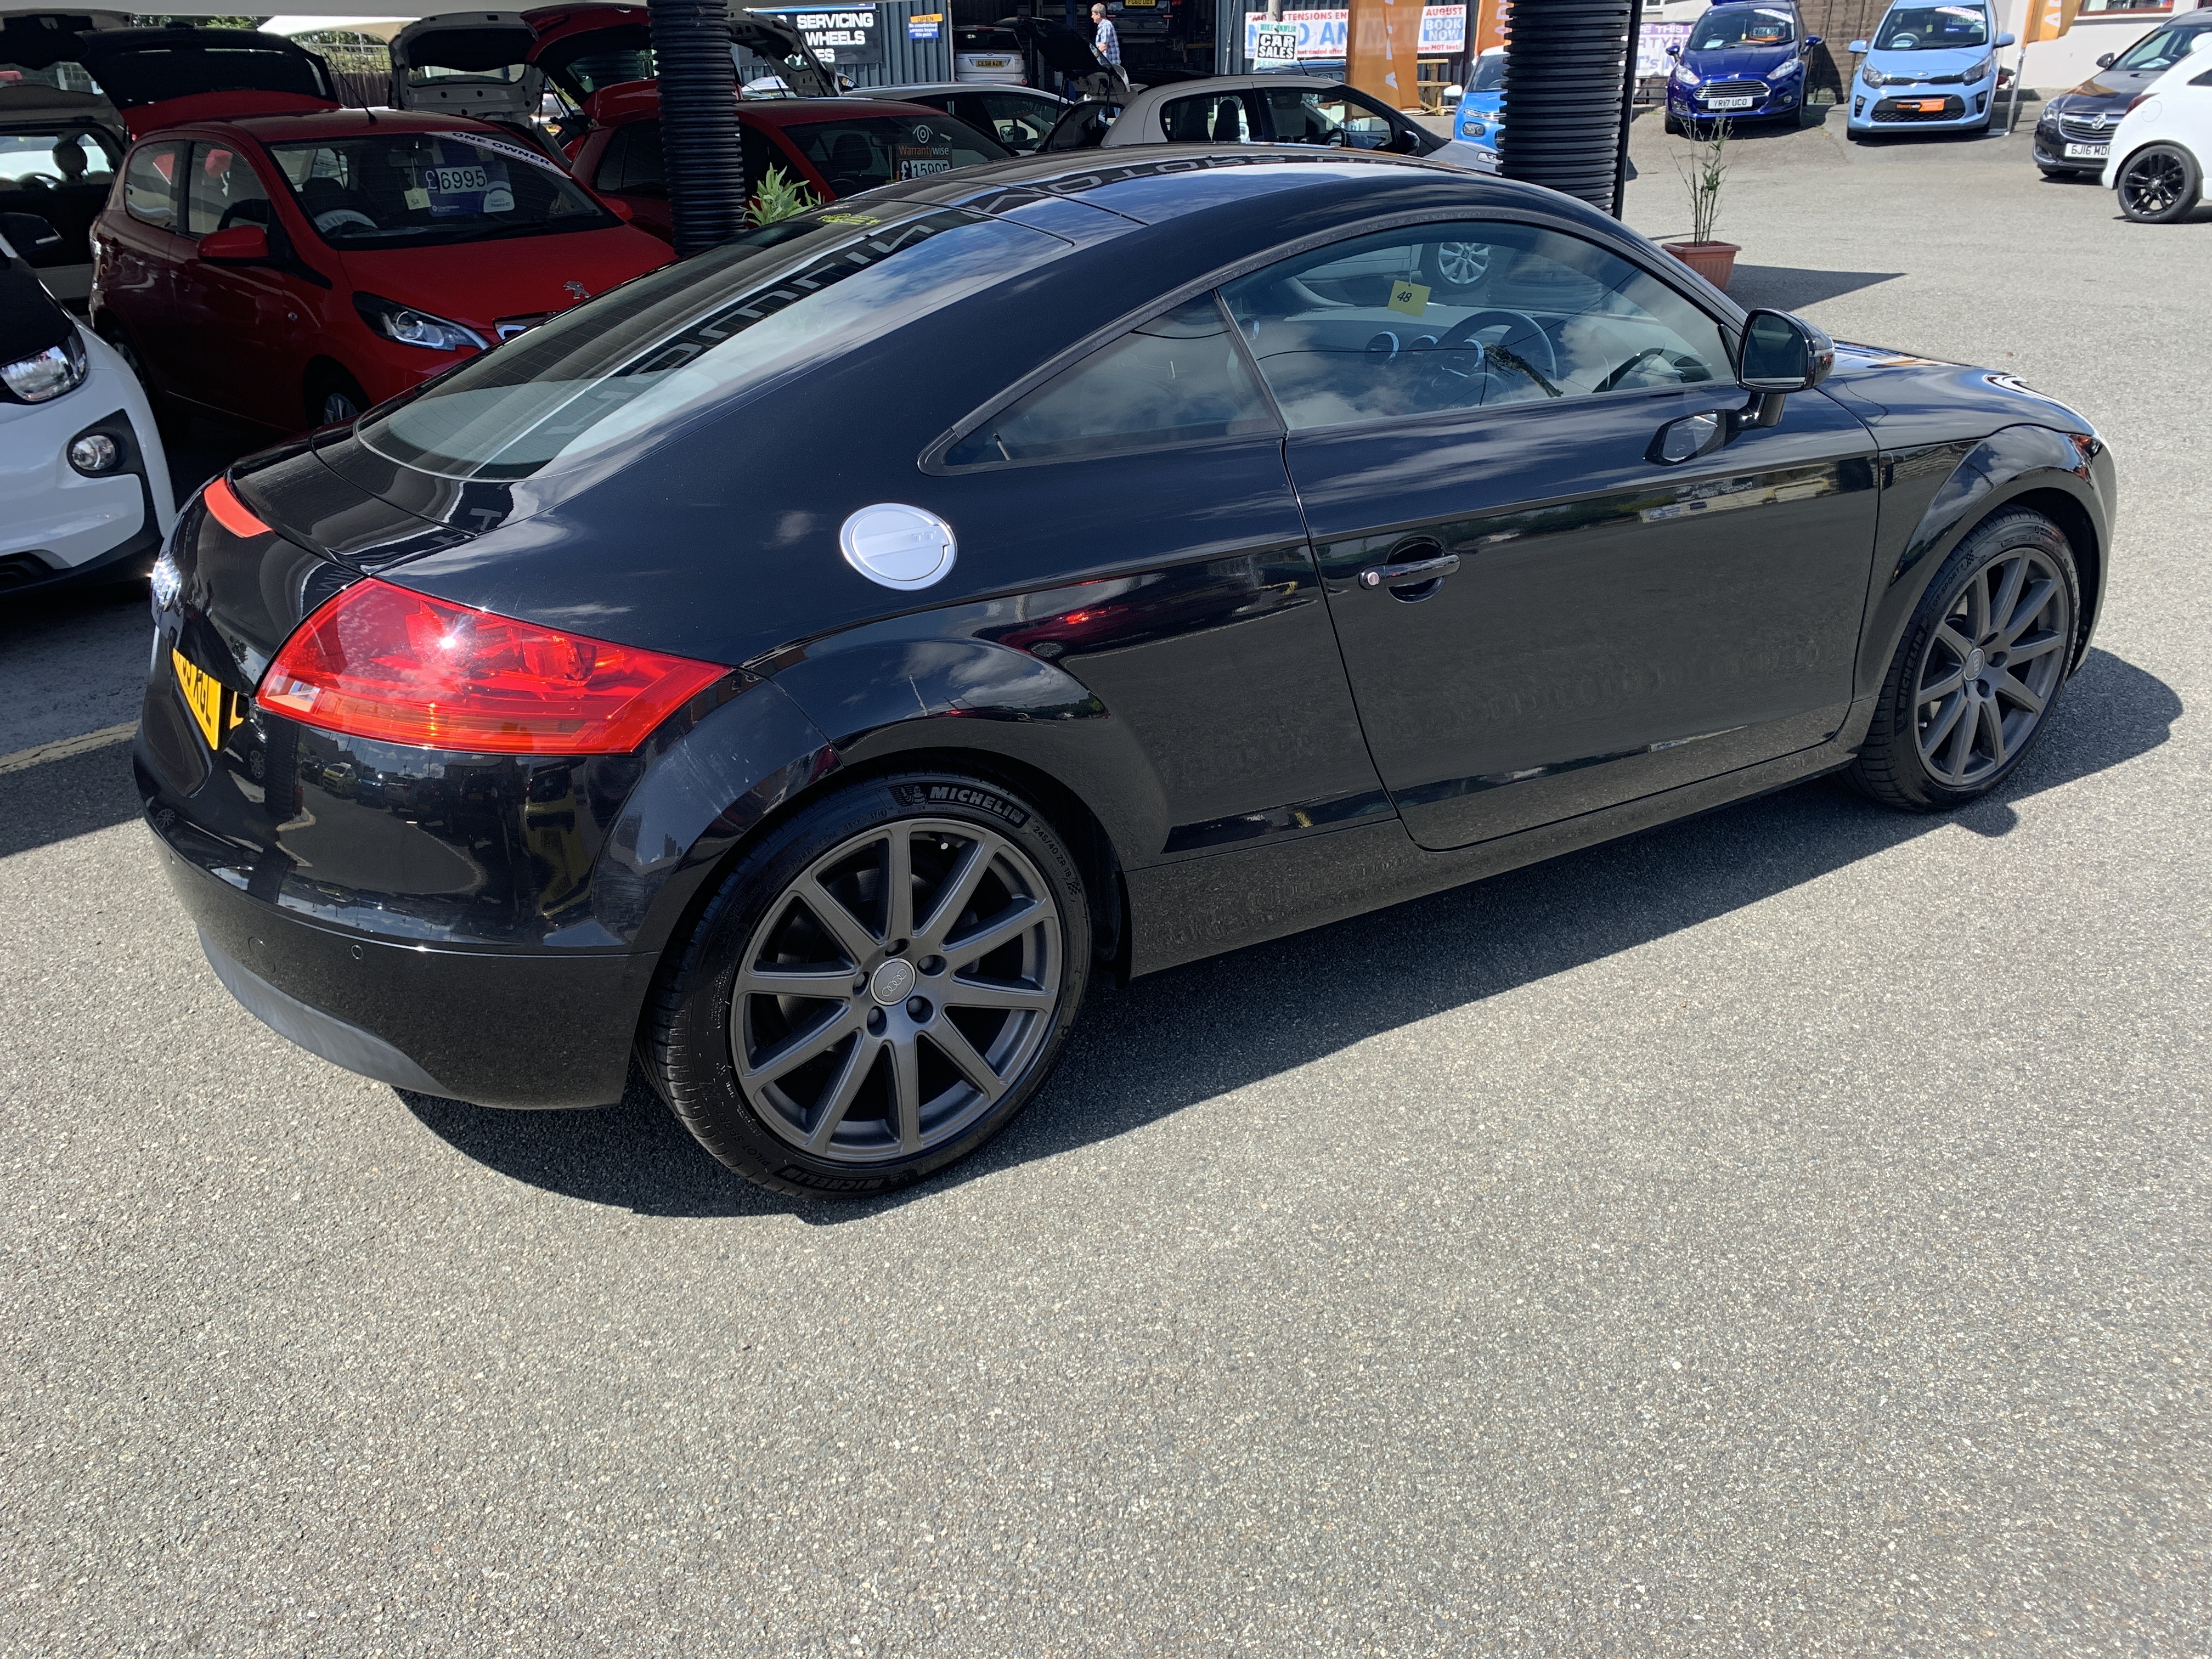 Audi TT FSI AUTO  for sale at Mike Howlin Motor Sales Pembrokeshire